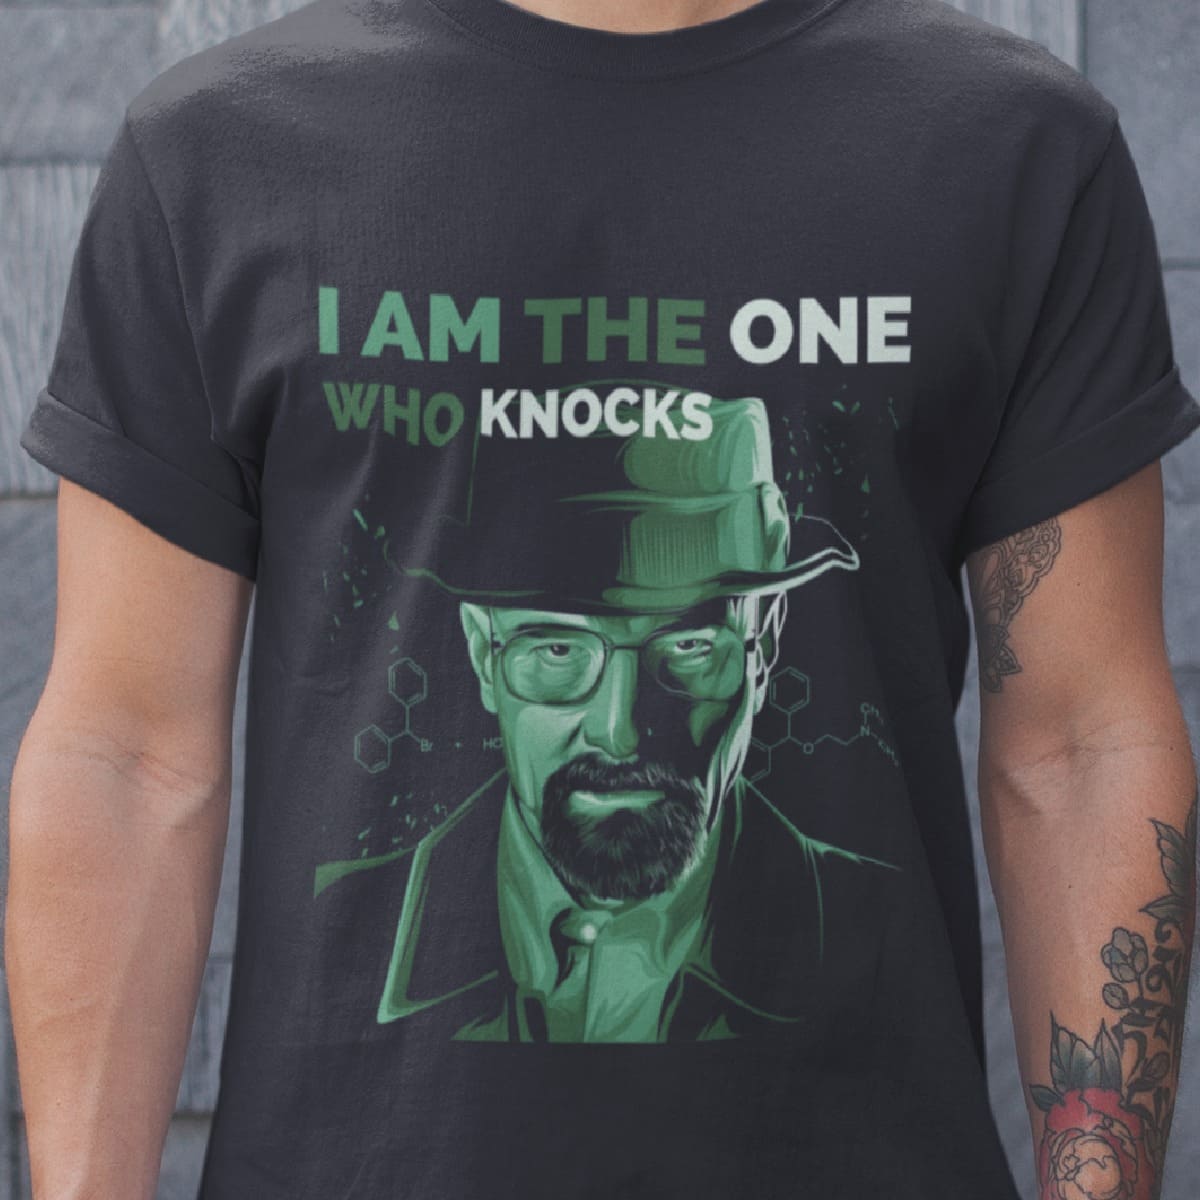 I am the one who knocks - Breaking bad movie, Walter White